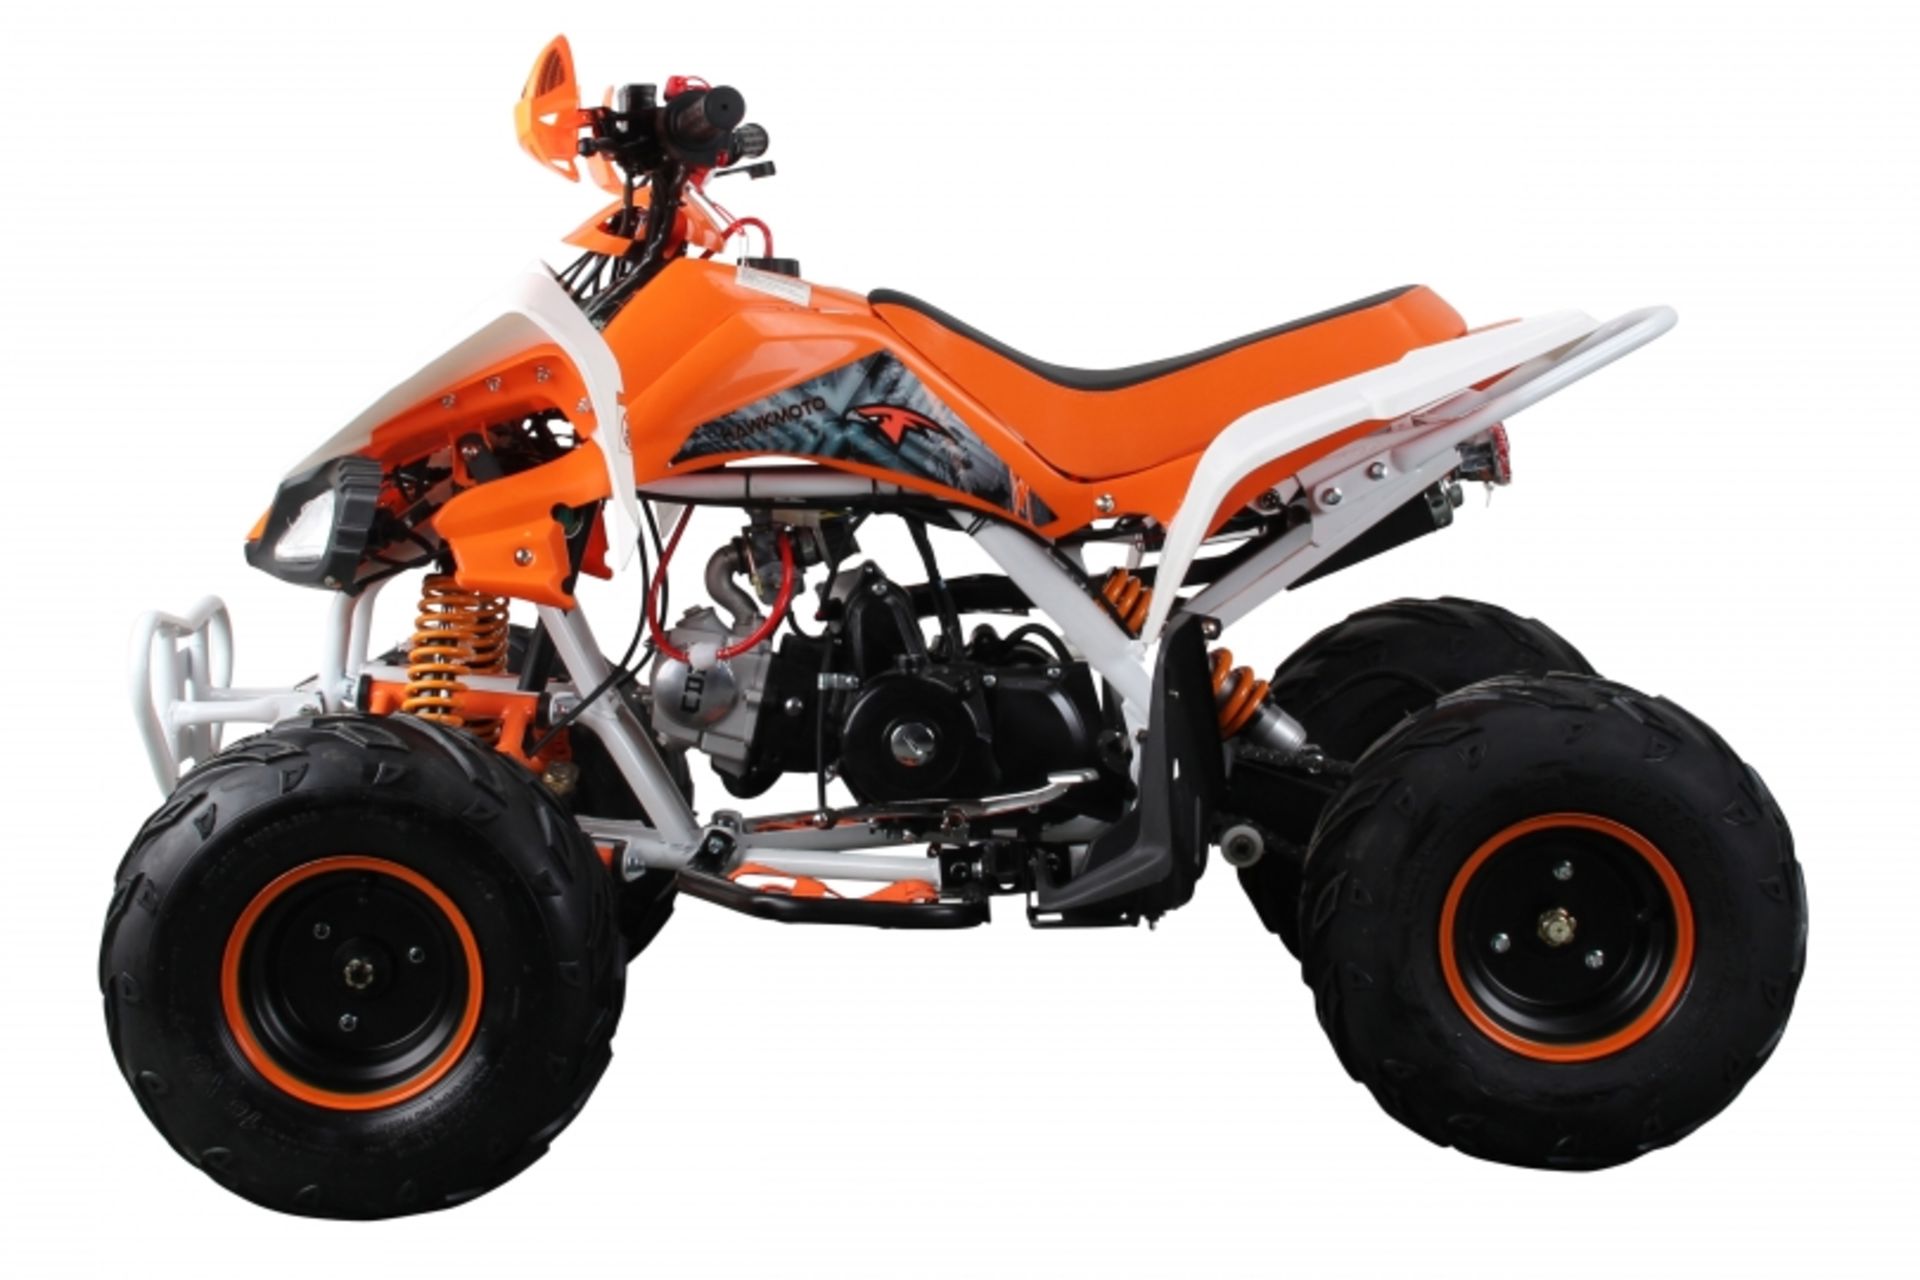 V Brand New 125cc Interceptor SV2 4 Stroke Quad Bike With Reverse Gear - Double Front Suspension/ - Image 2 of 5